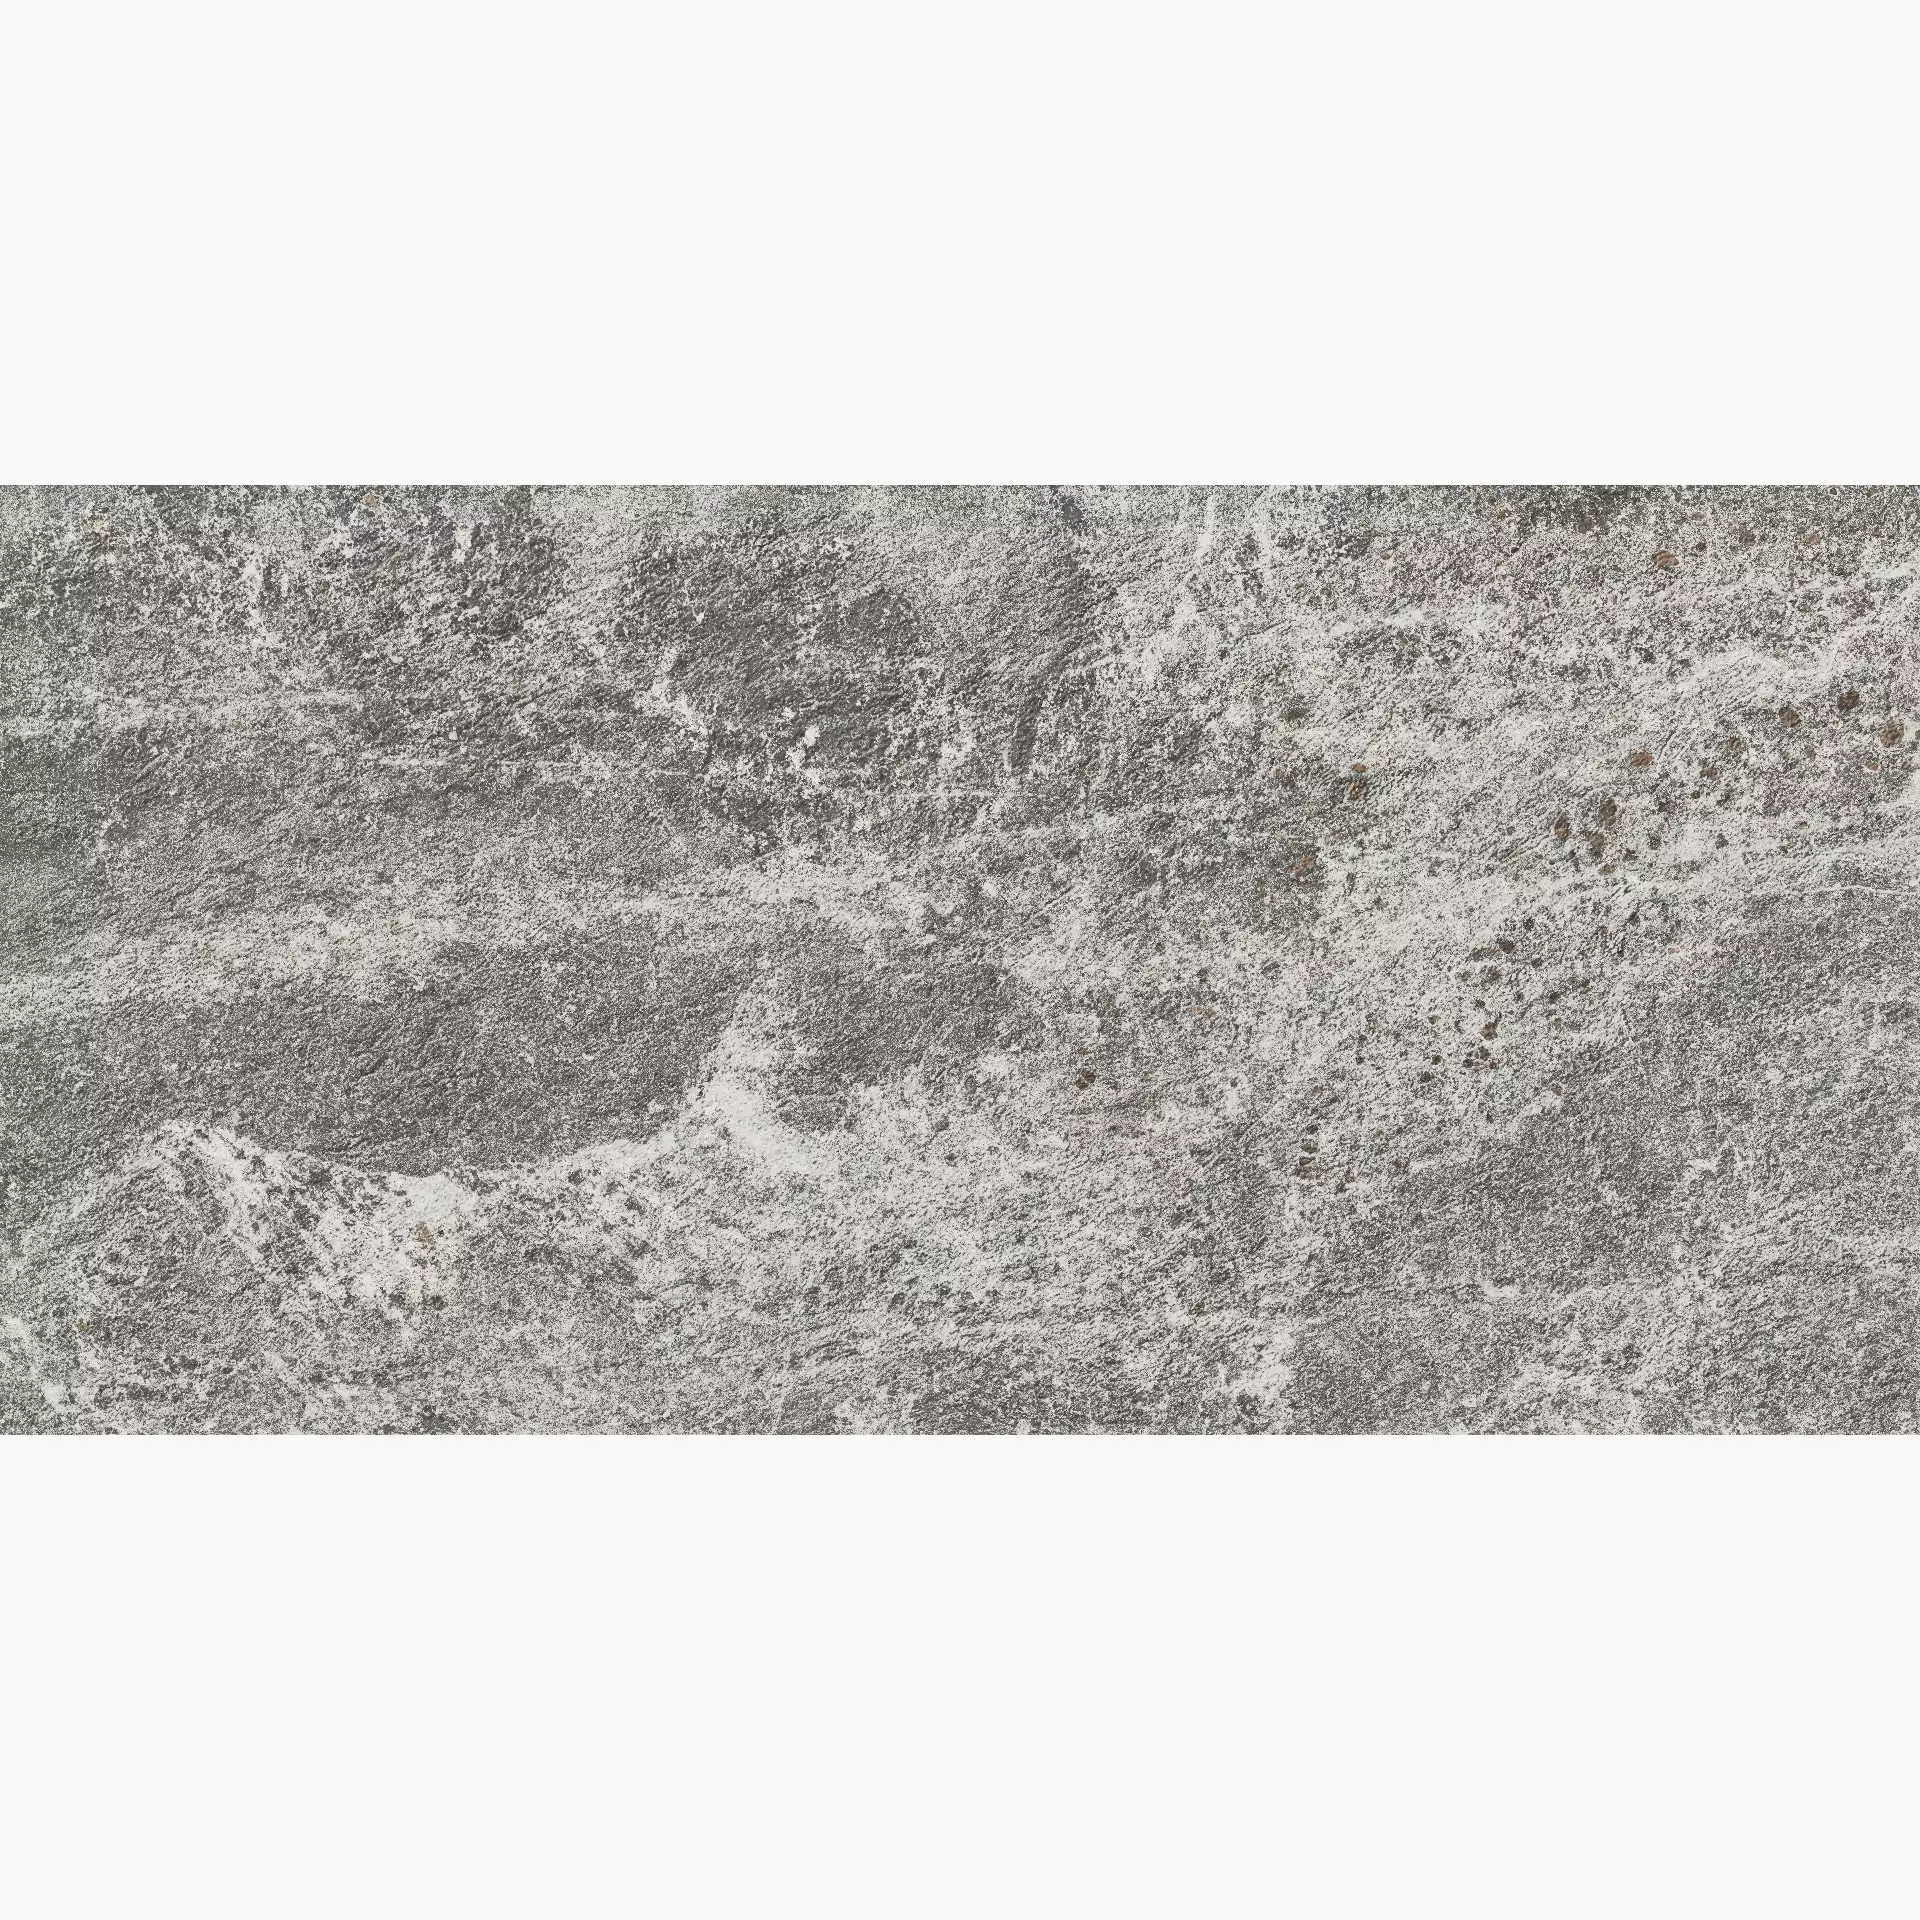 Panaria The Place Suburb Grey Antibacterial - Strutturato PGKP920 20x40,5cm 12mm